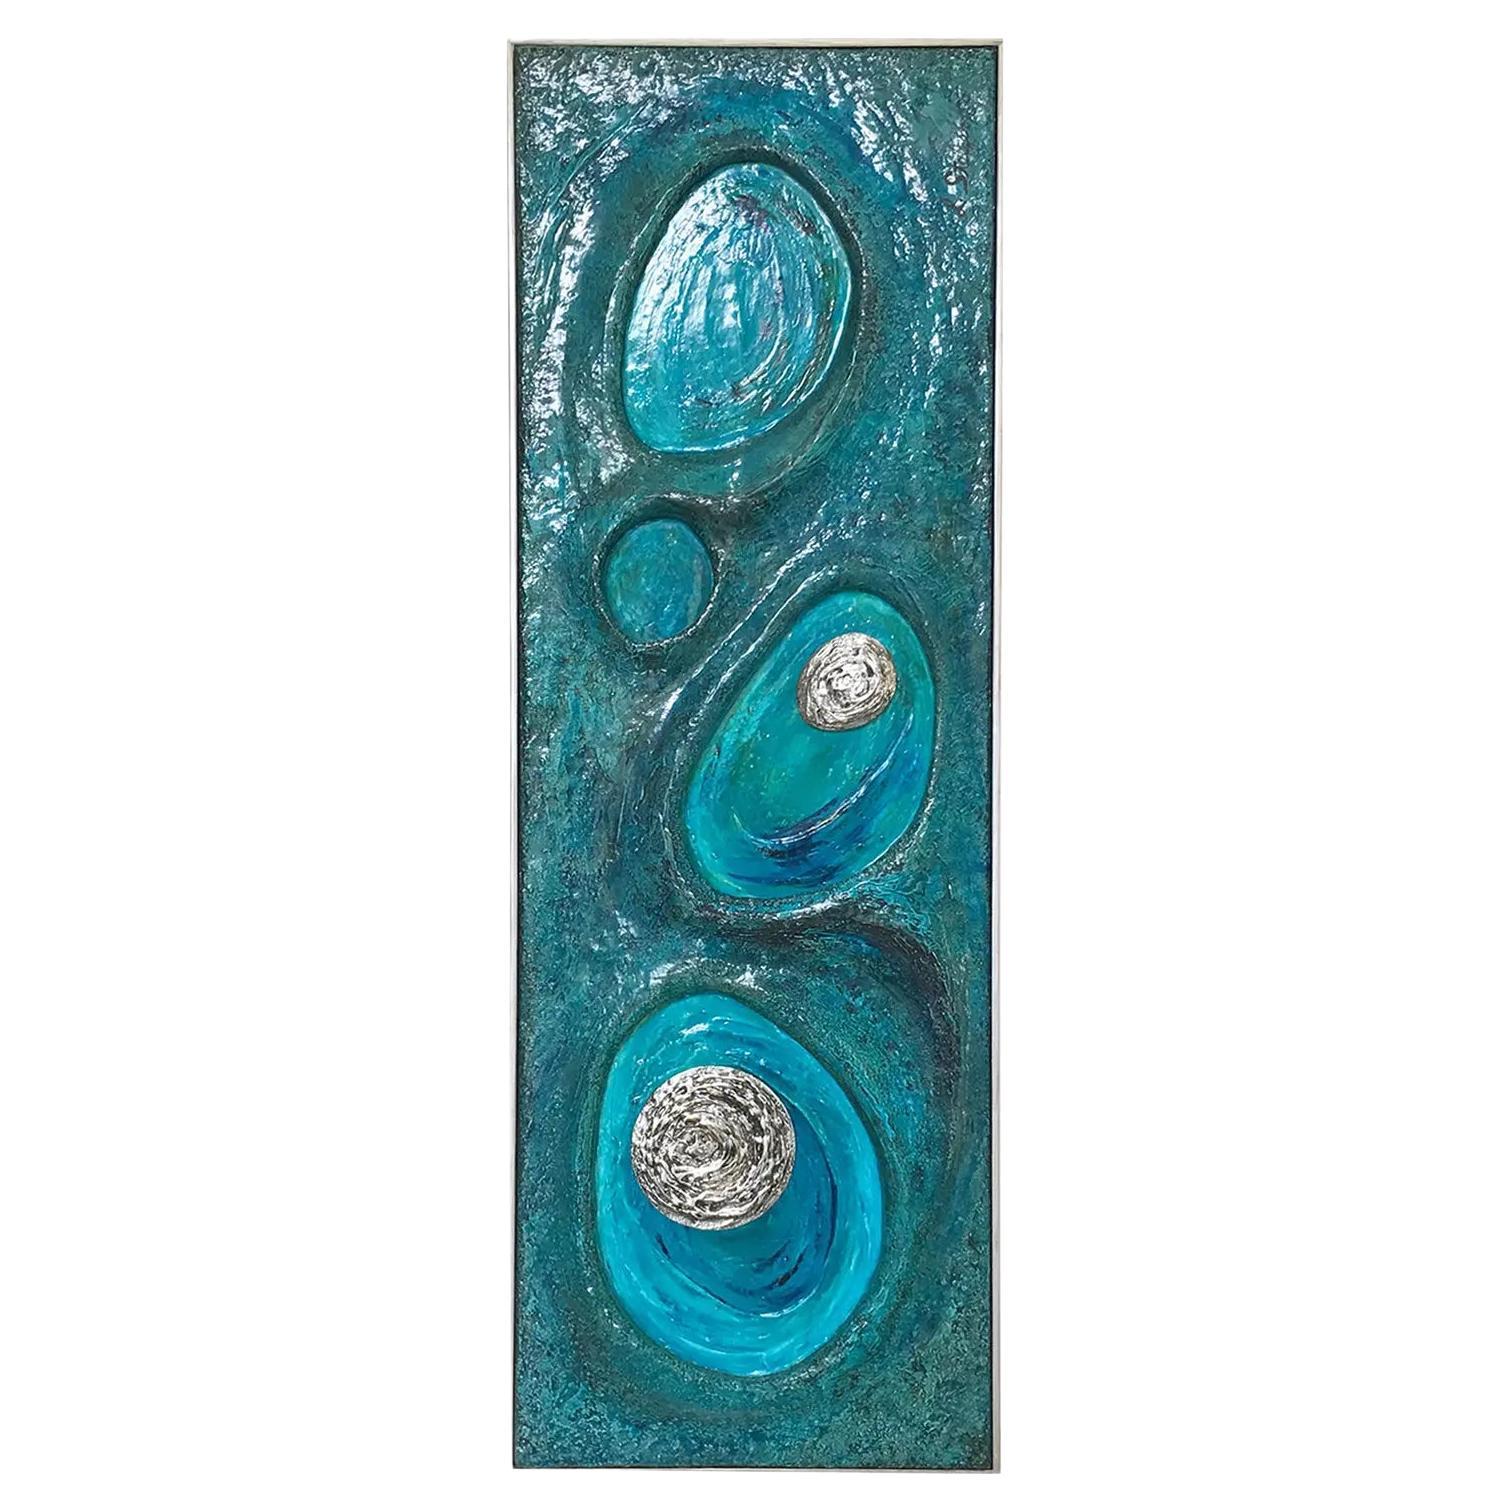 Lorraine Stelzer Turquoise Acrylic Resin Psychedelic Art Wall Sculpture Panel